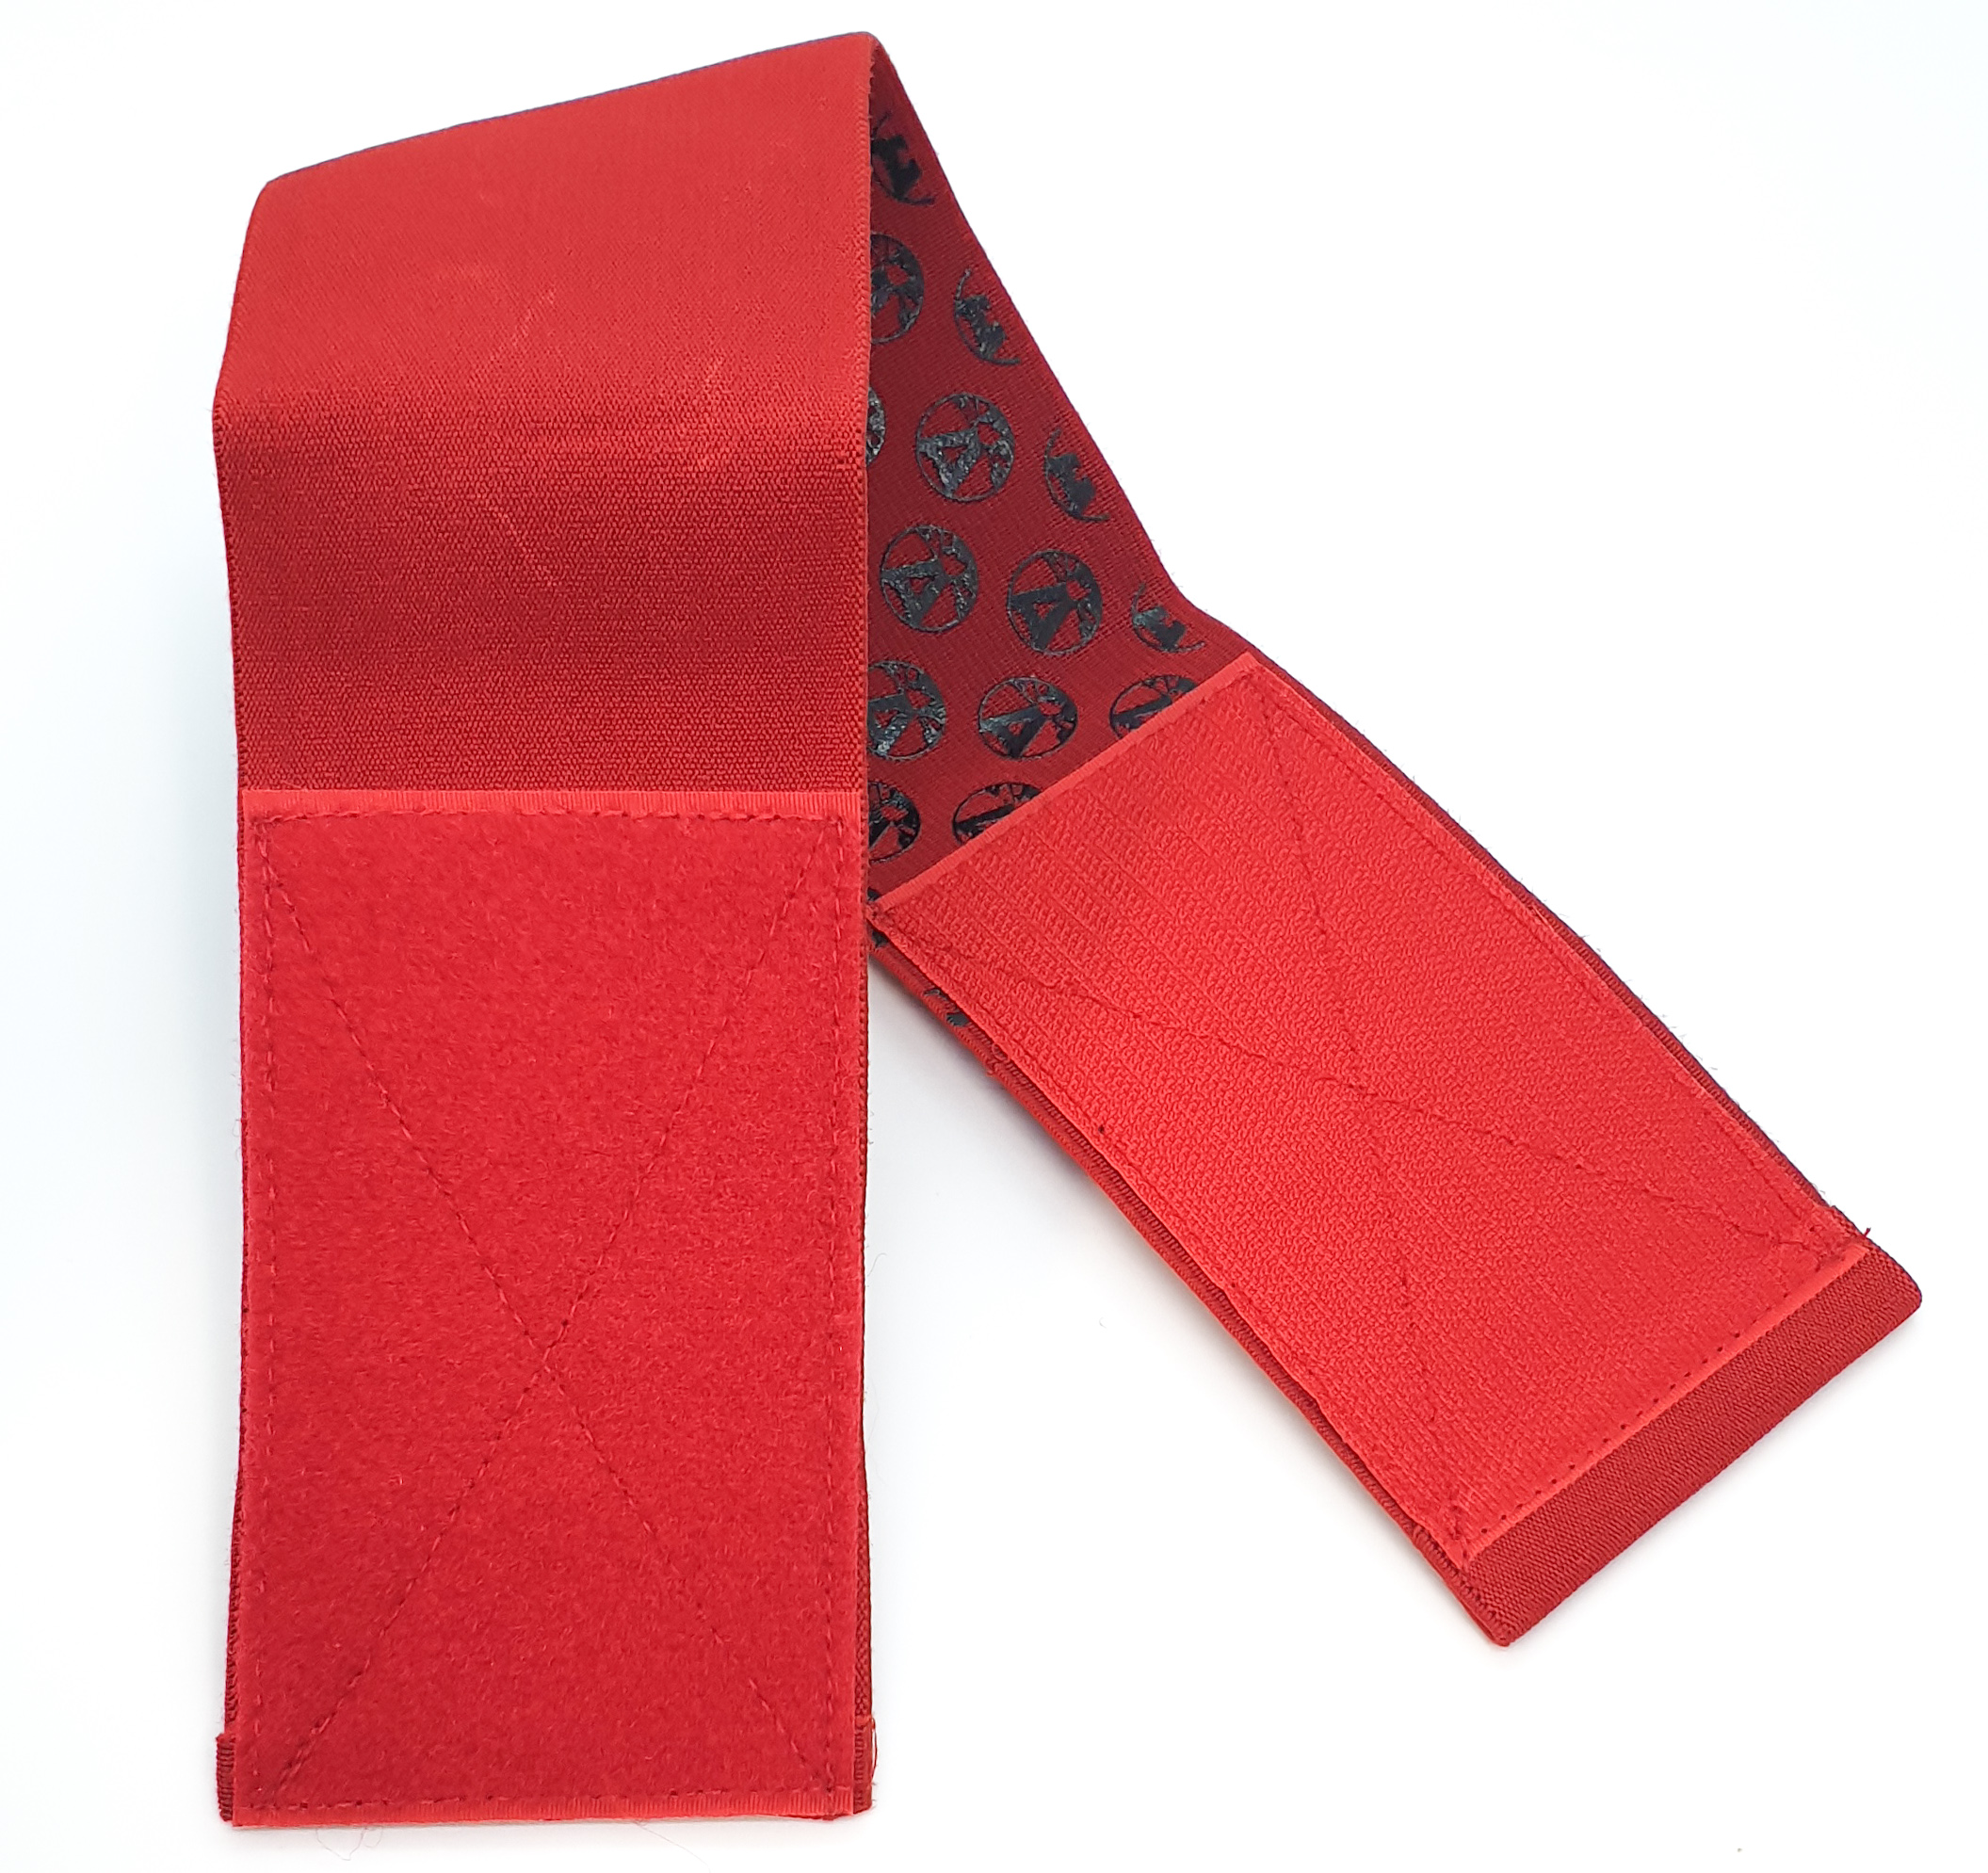 VolcAno Arm Band 3"Wide - Red